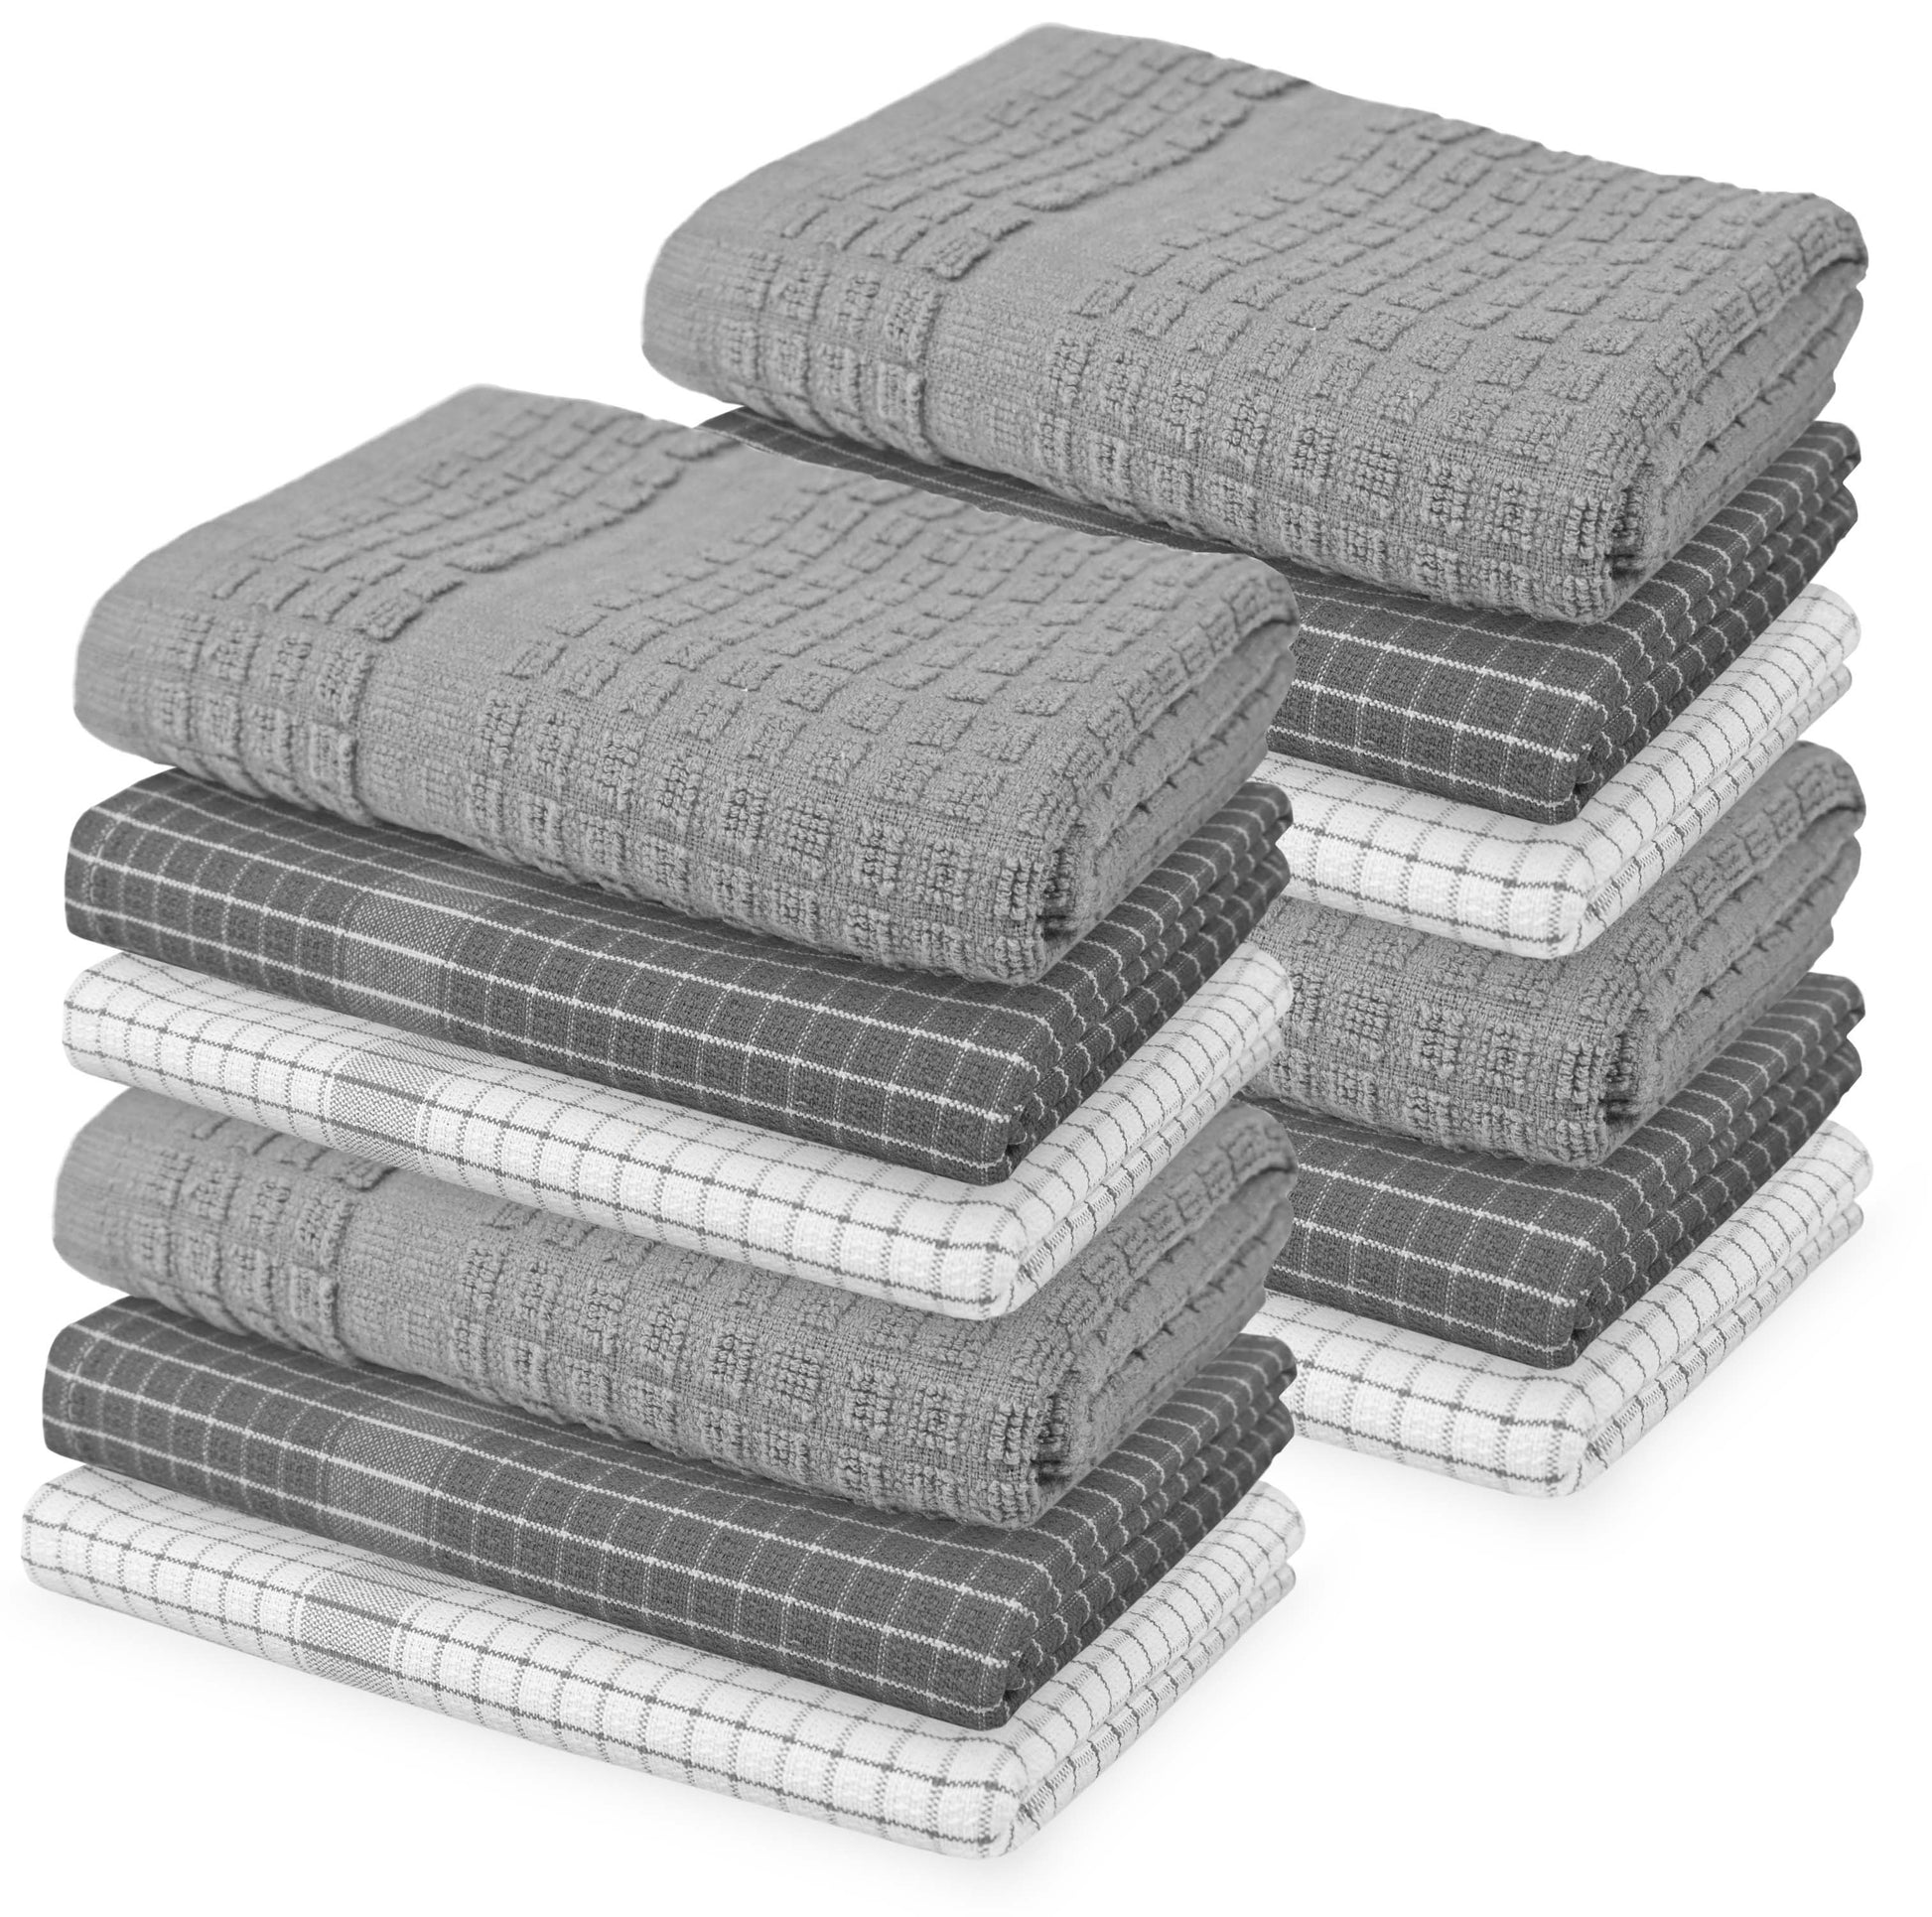 Infinitee Xclusives Grey Kitchen Towels - 100% Cotton 15 x 25 Super  Absorbent Table Cleaning Dish Towels, 425 GSM Super Soft Tea Towel, Durable Hand  Towel, Best for Household Cleaning 